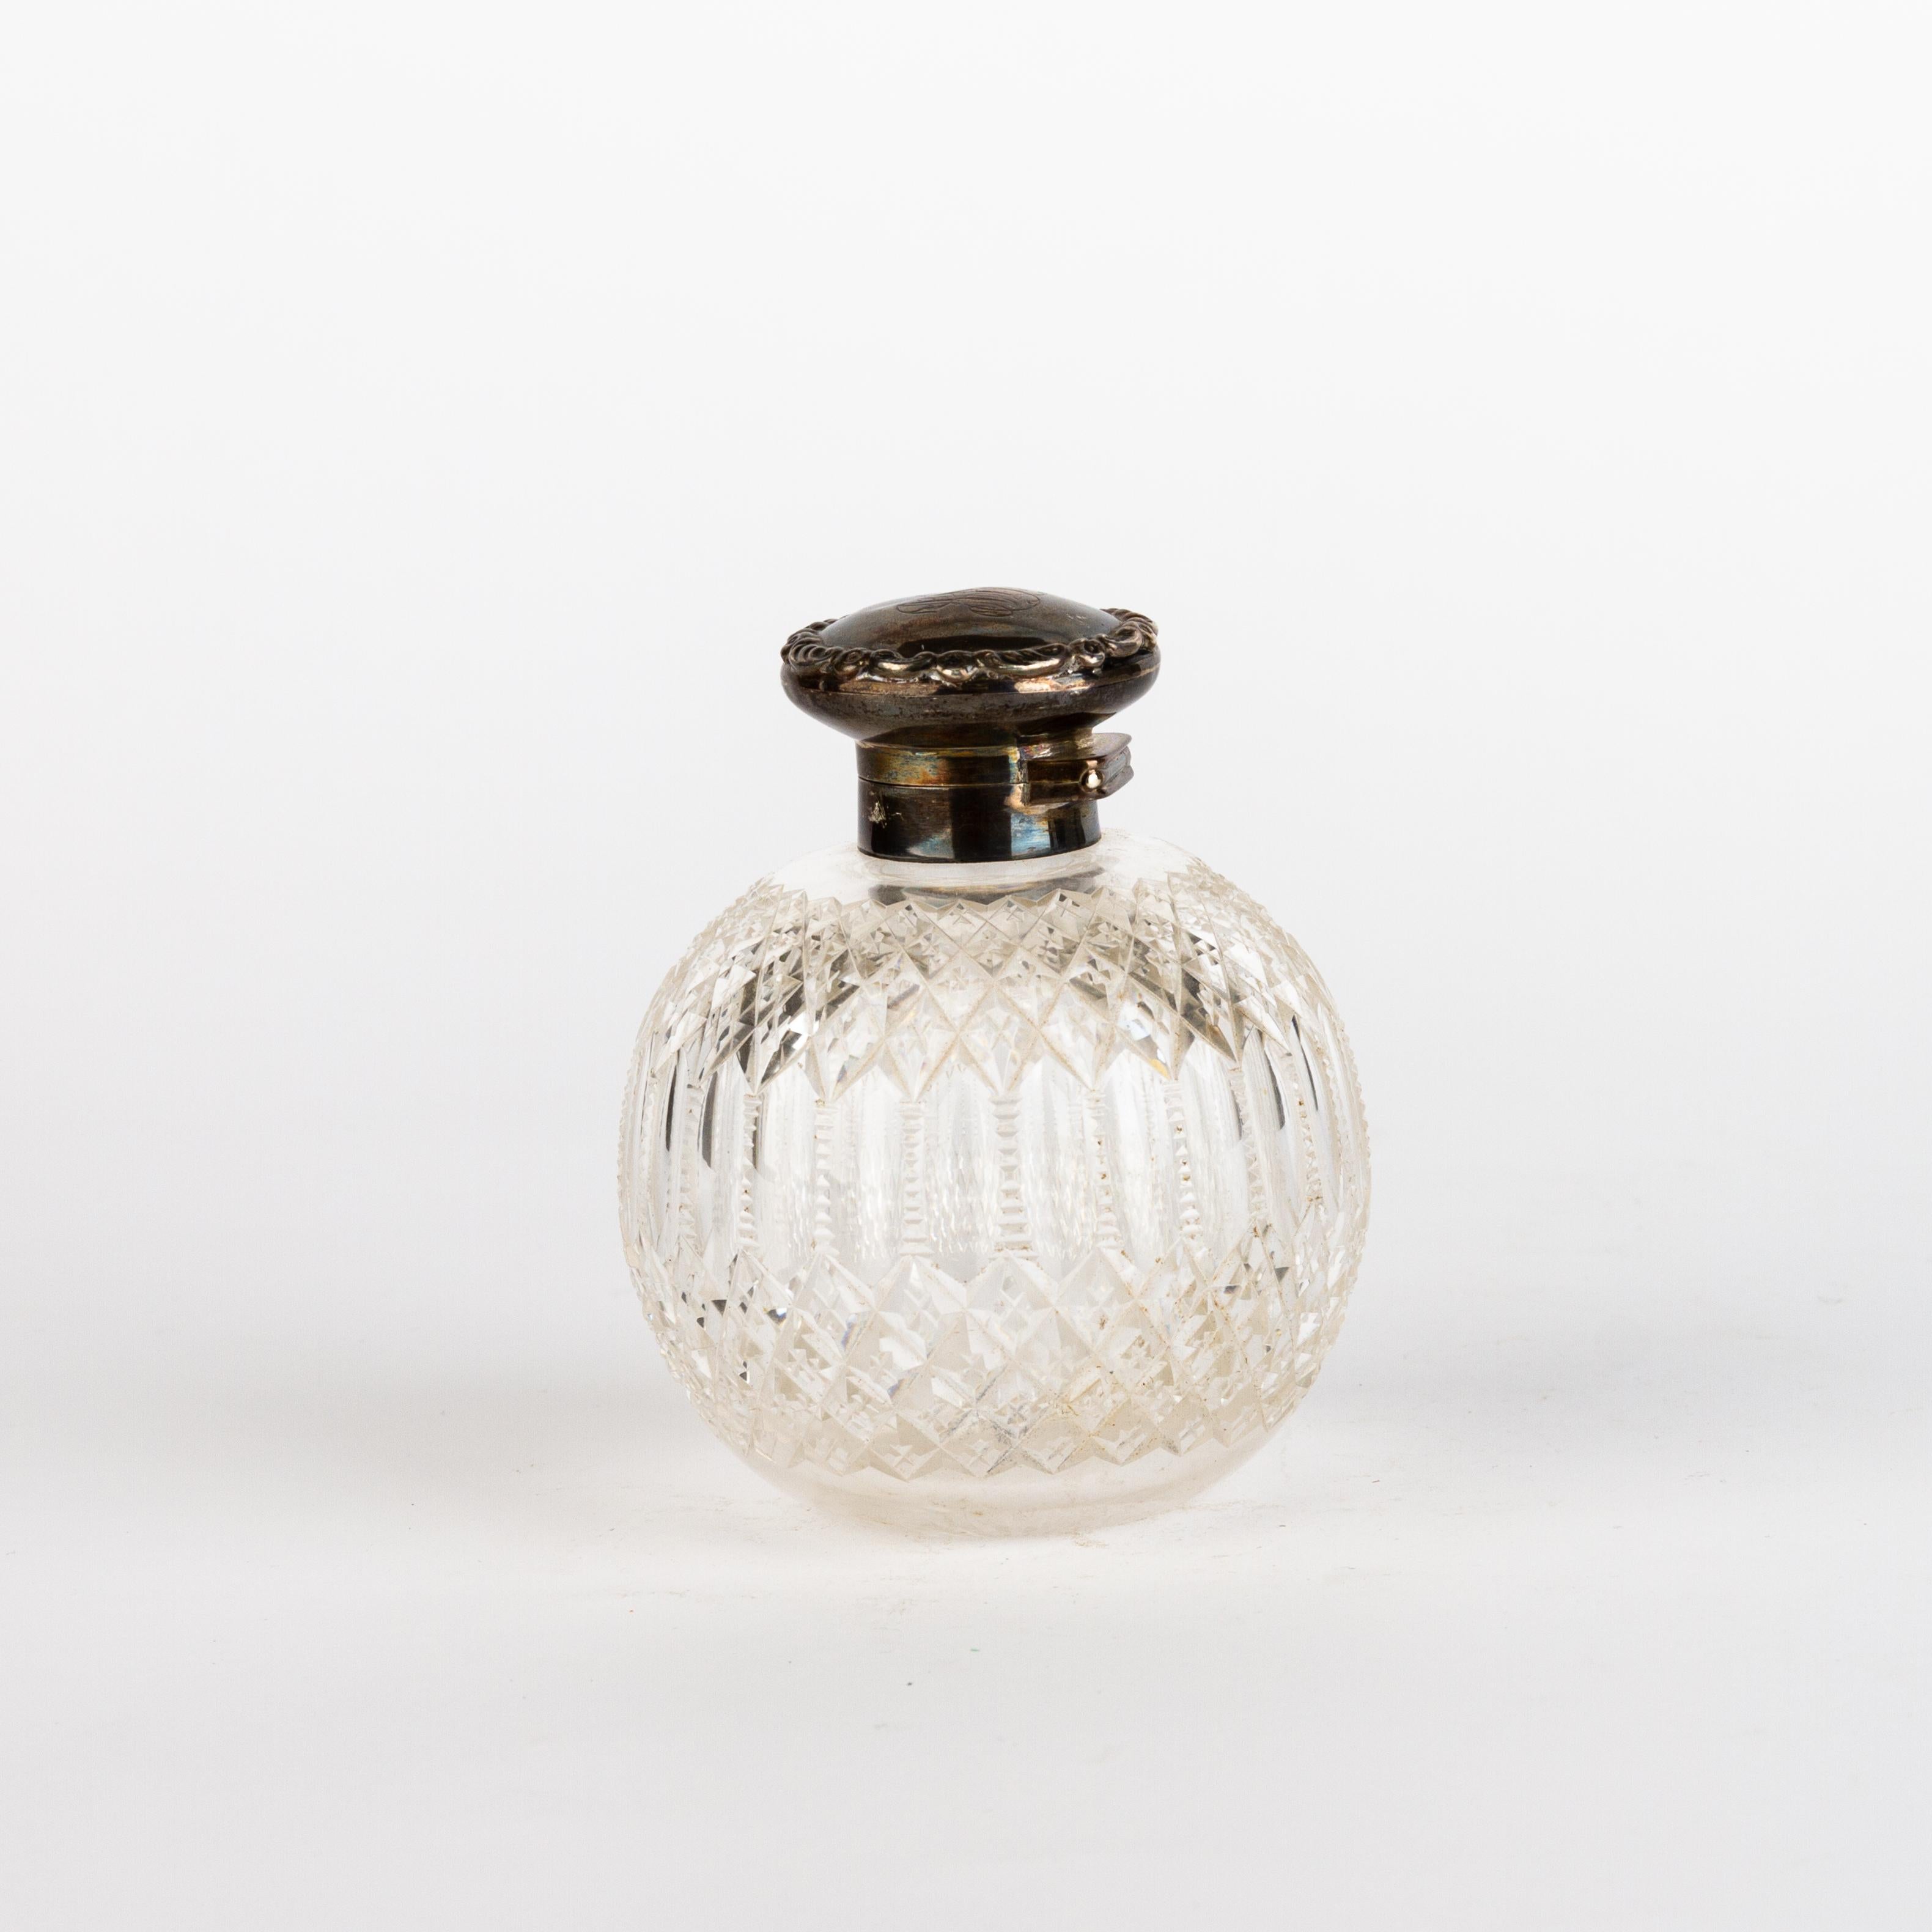 Victorian Cut Crystal Glass Perfume Scent Bottle 
Good condition
Free international shipping.